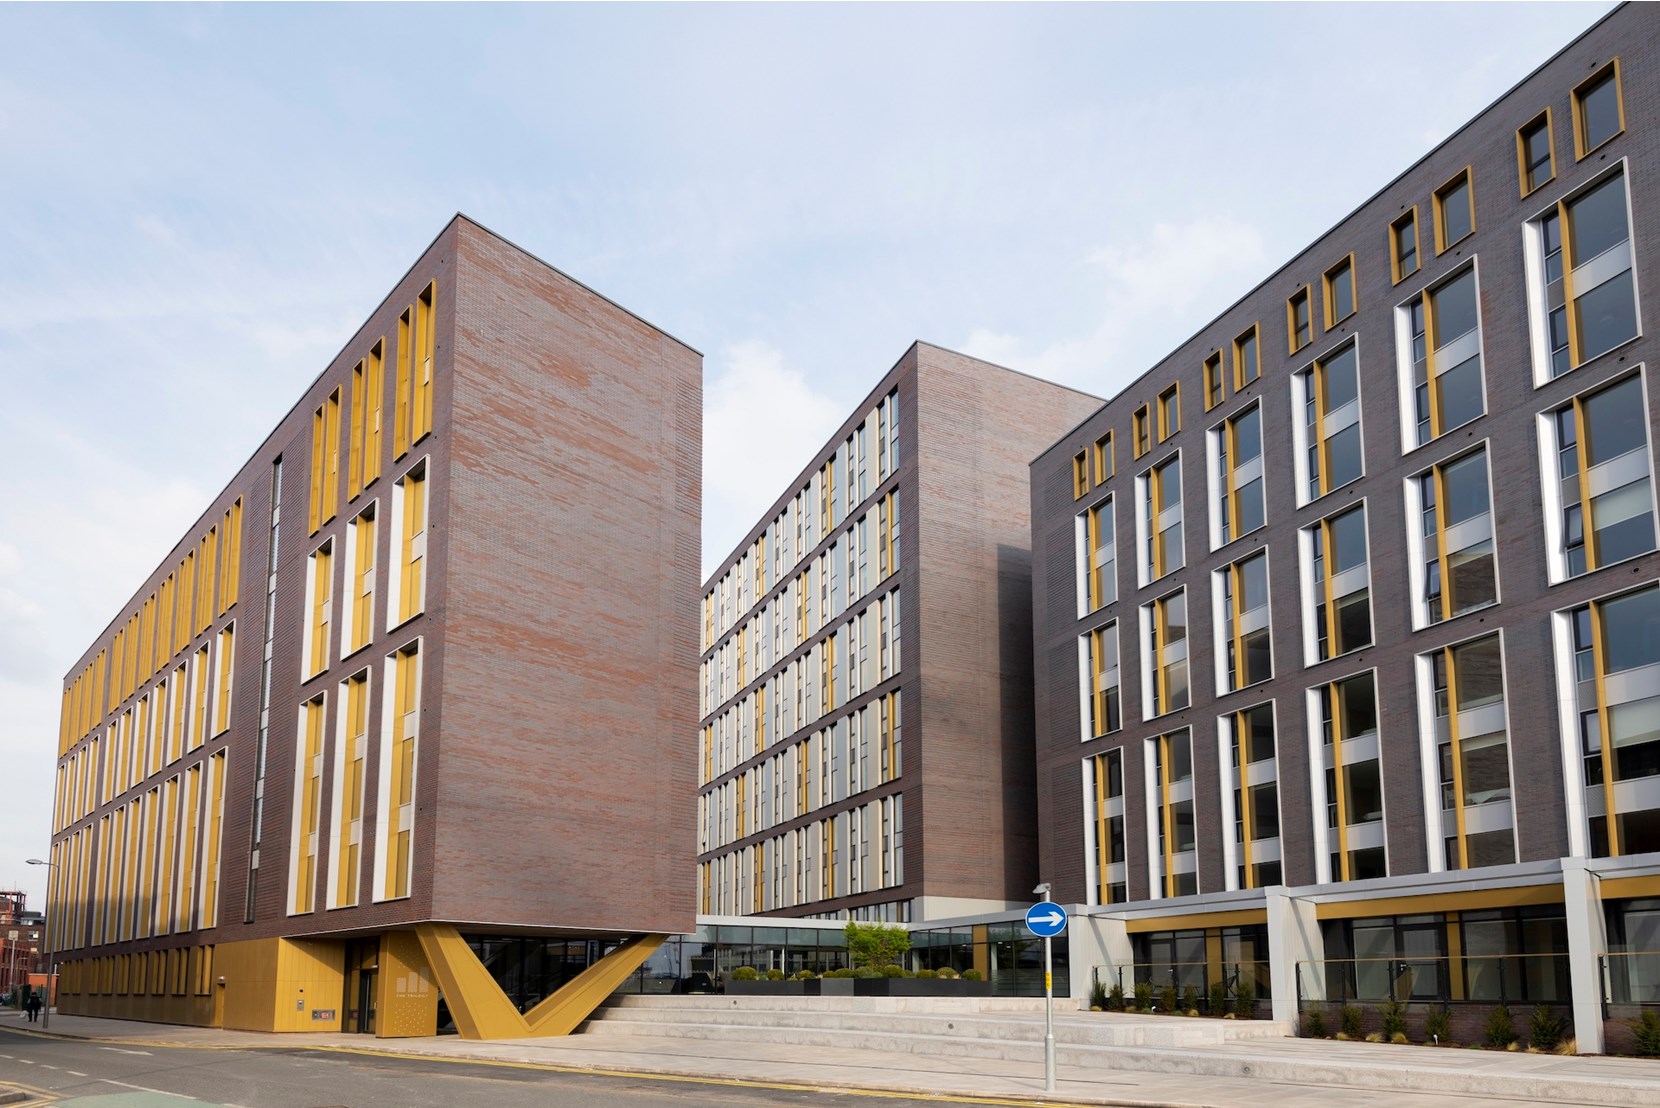 Apartments to Rent by Allsop at The Trilogy, Manchester, M15, development panoramic